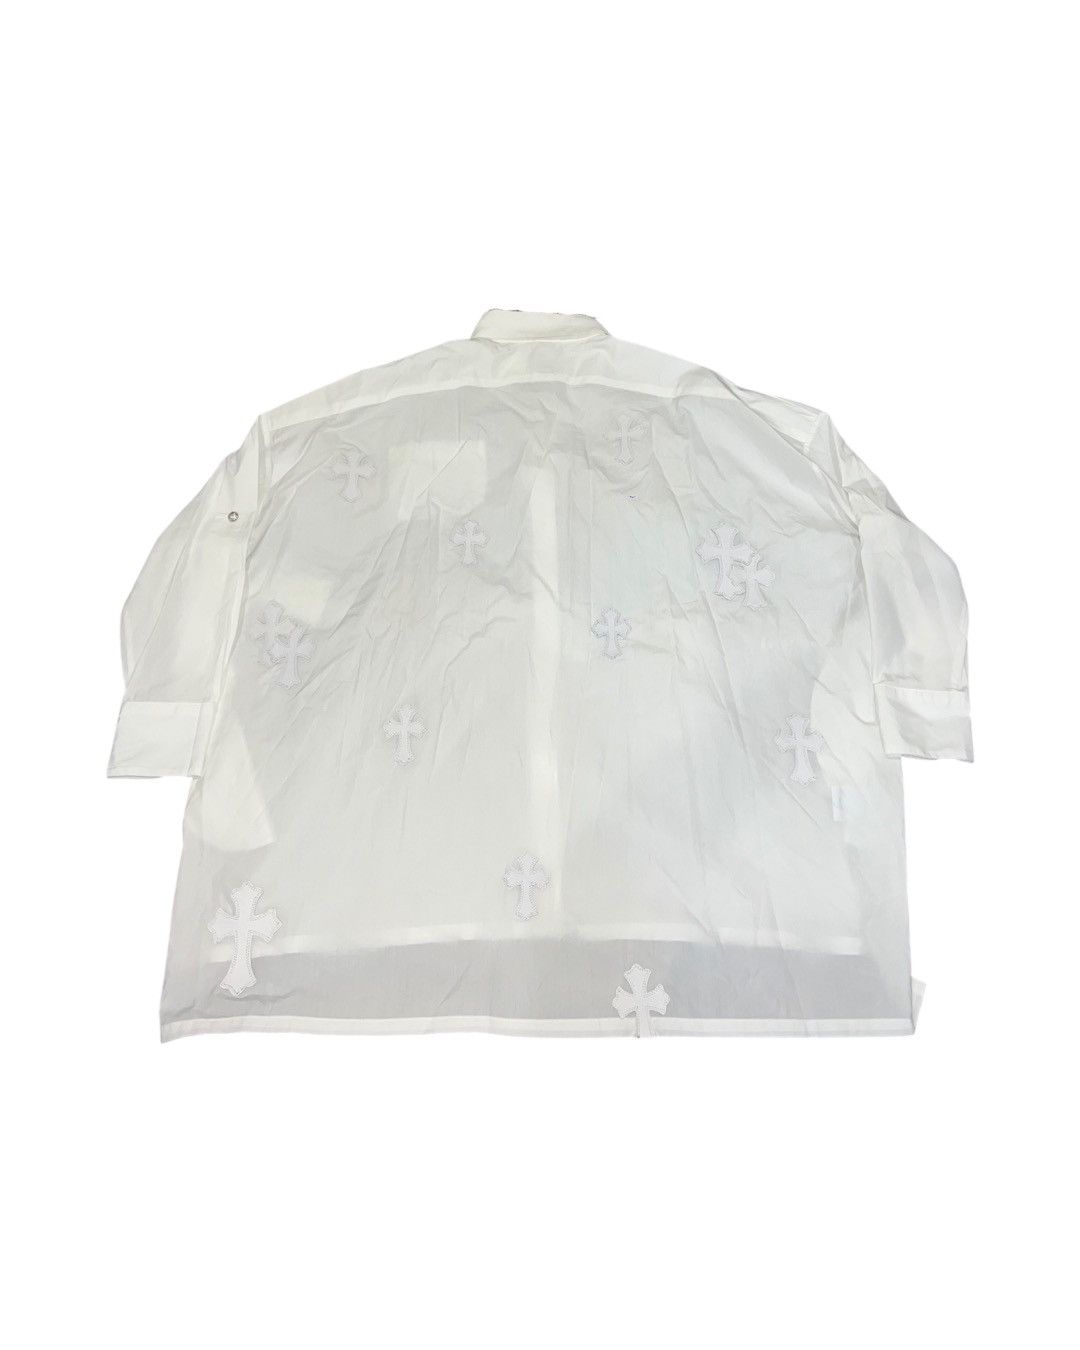 Mahal Kita white leather cross patch button up shirt - 2